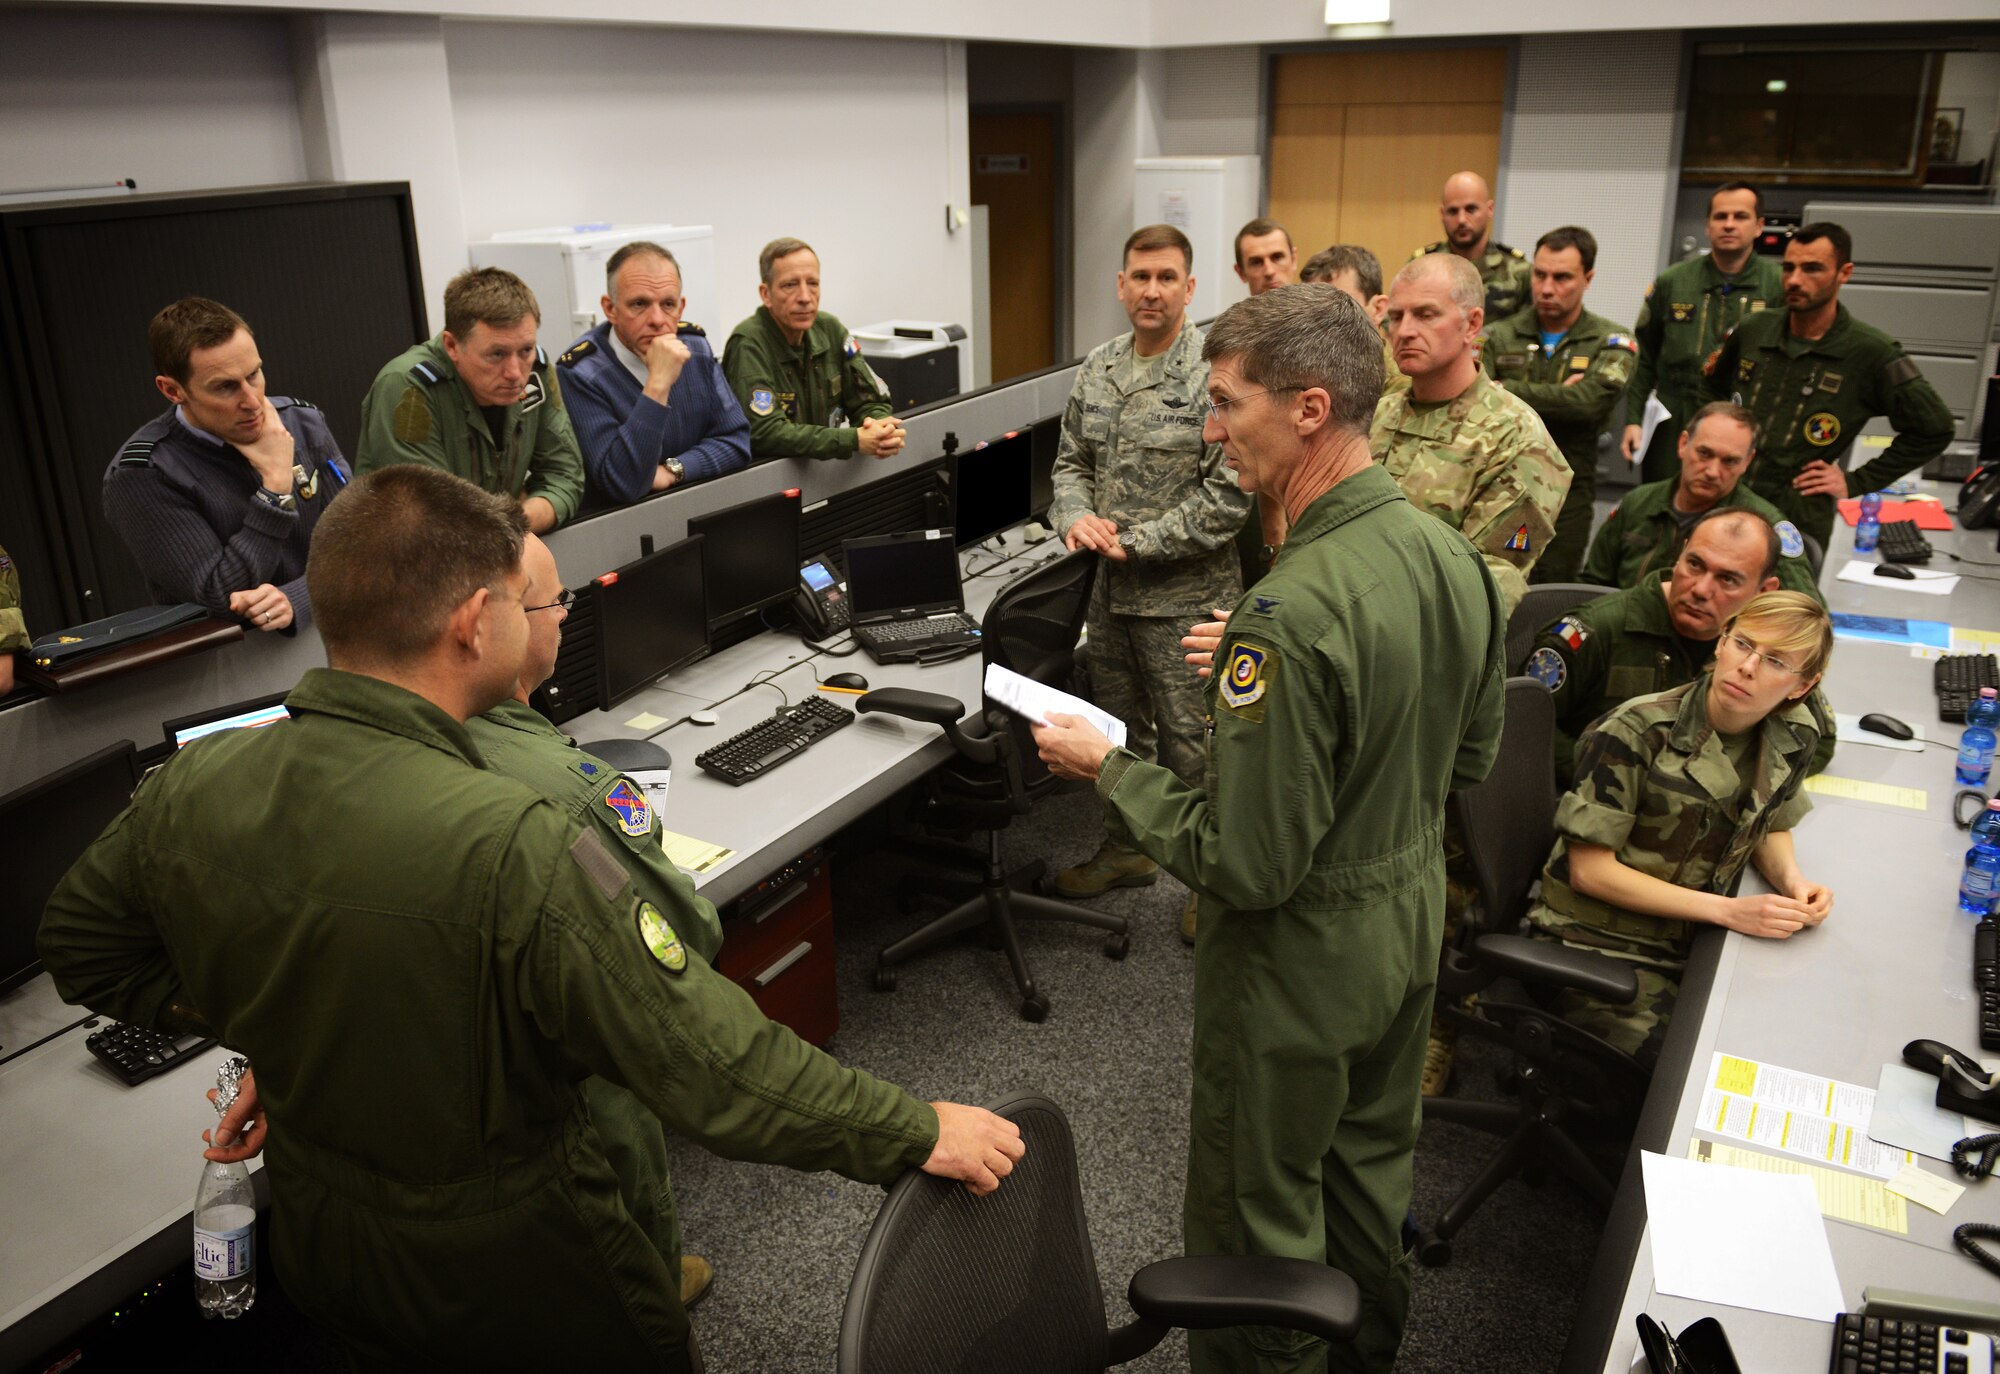 Col. Jeff Marker, 603d Air and Space Operations Center commander, briefs a combined team of French, United Kingdom and U.S. airmen after the completion of exercise Tonnerre Lightning 14-1 March 28, 2014, at Ramstein Air Base, Germany. The exercise is the first in a series of semi-annual exercises between the NATO countries to improve interoperability and communication in the event of a real-world scenario.  (U.S. Air Force photo/Staff Sgt. Ryan Crane)